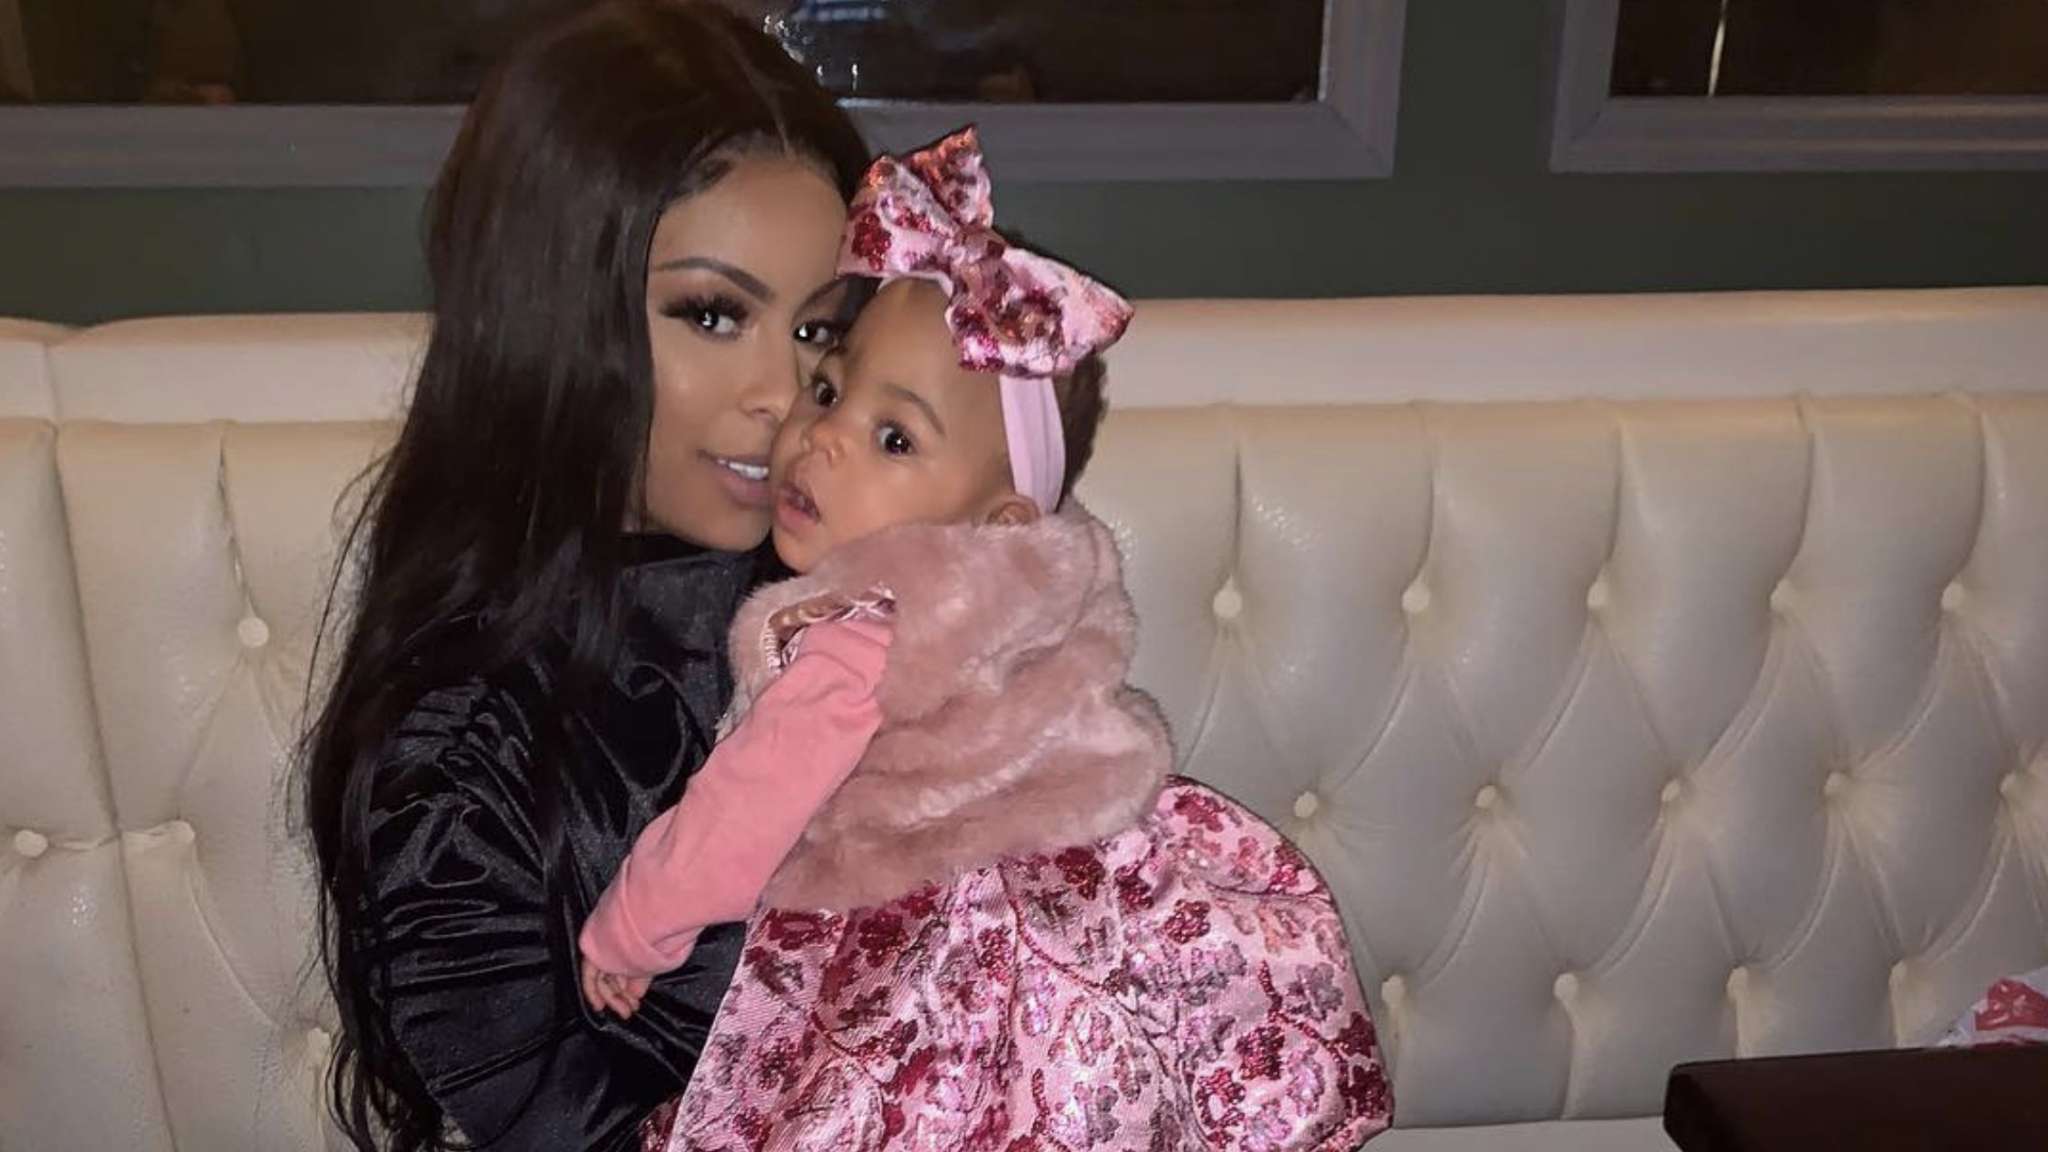 ”alexis-skyy-baby-girl-is-out-of-the-hospital-after-super-scary-brain-surgery”